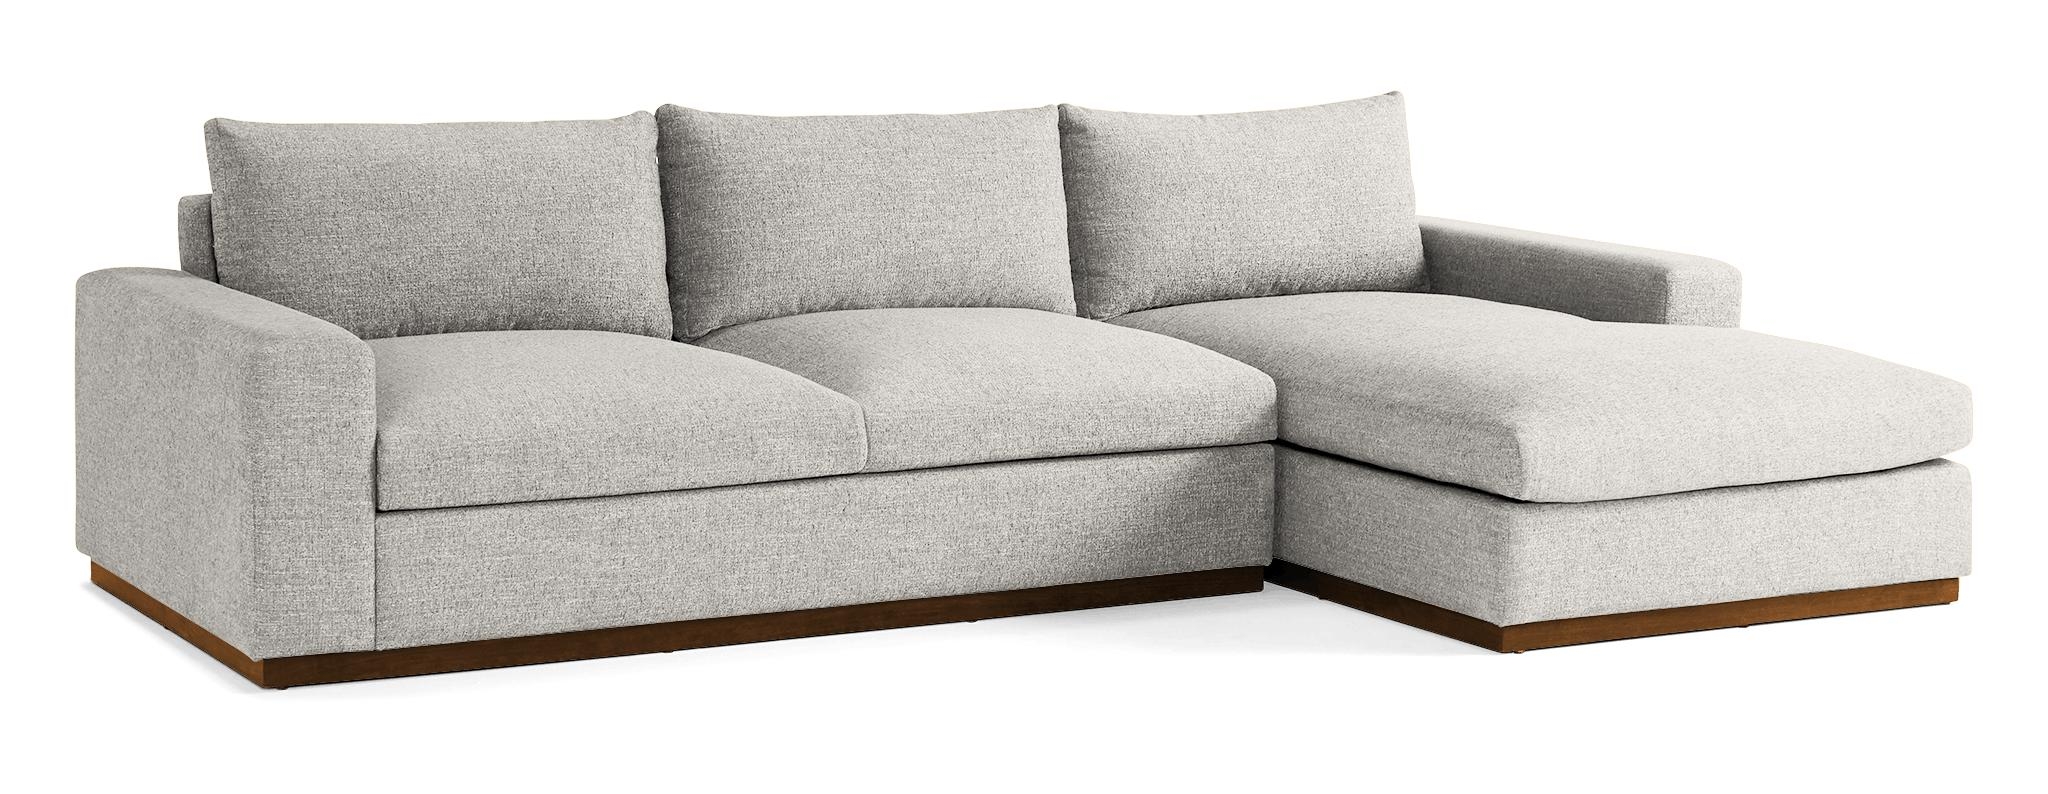 White Holt Mid Century Modern Sectional with Storage - Tussah Snow - Mocha - Left - Image 1